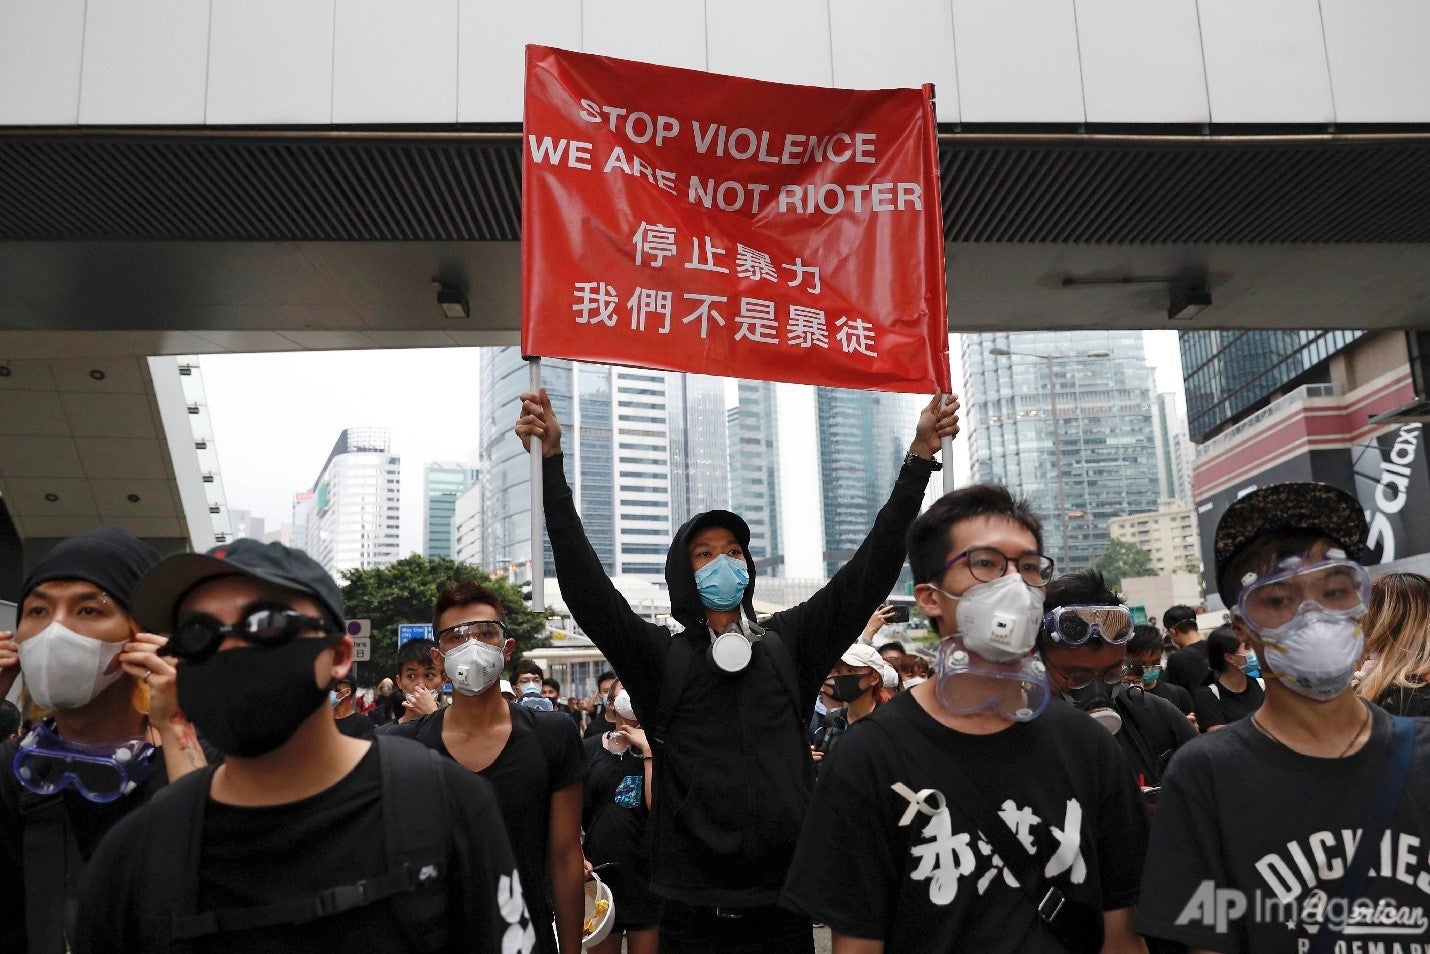 The Hong Kong Protests The International Response Political Science